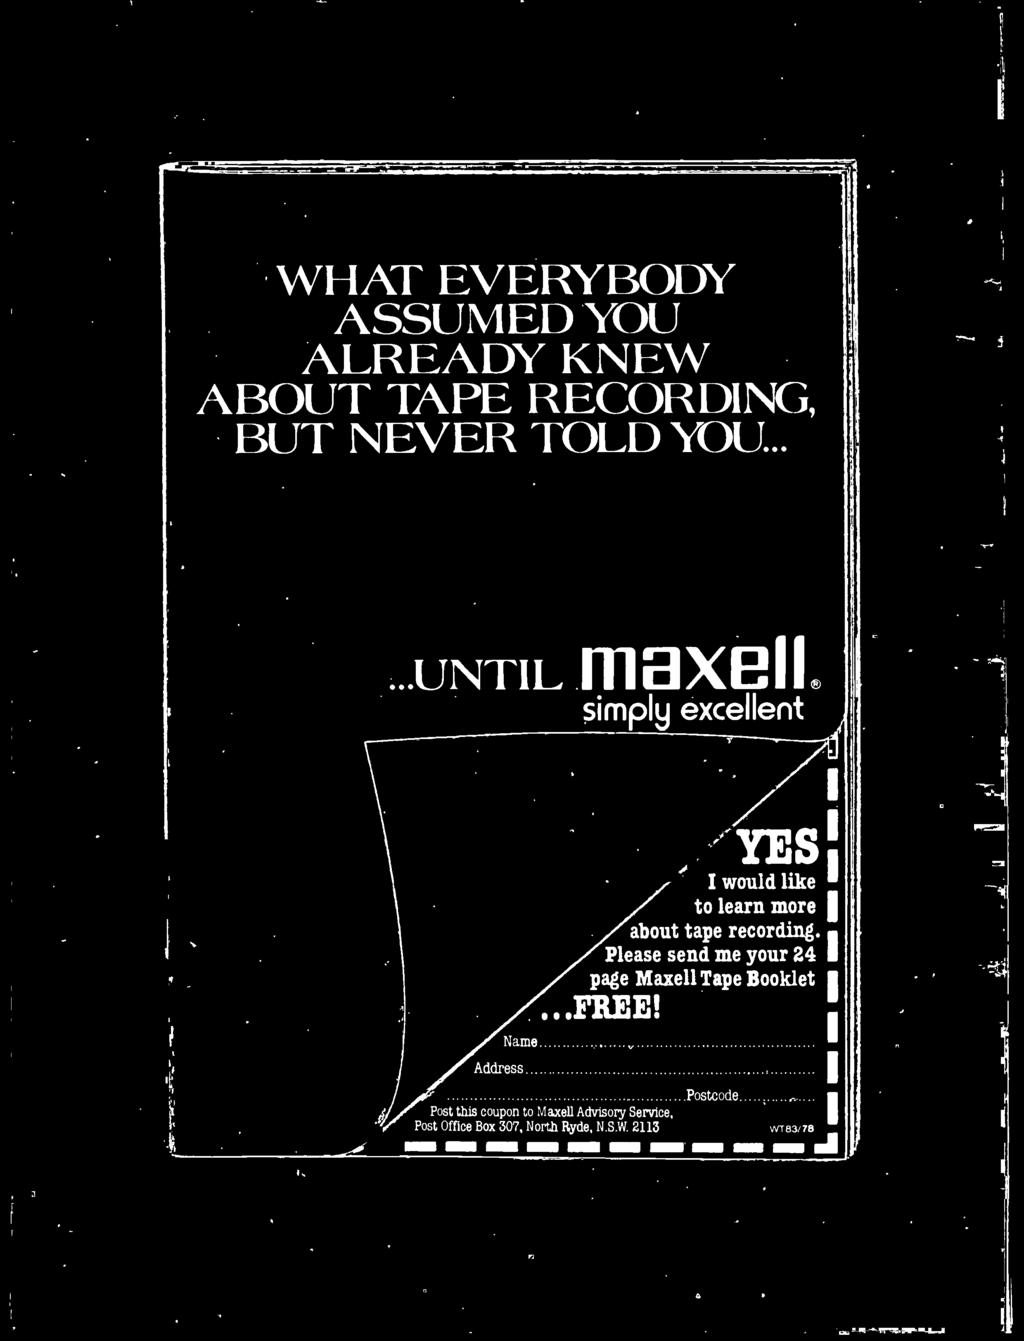 Please send me your 24 page Maxell Tape Booklet '...FREE!